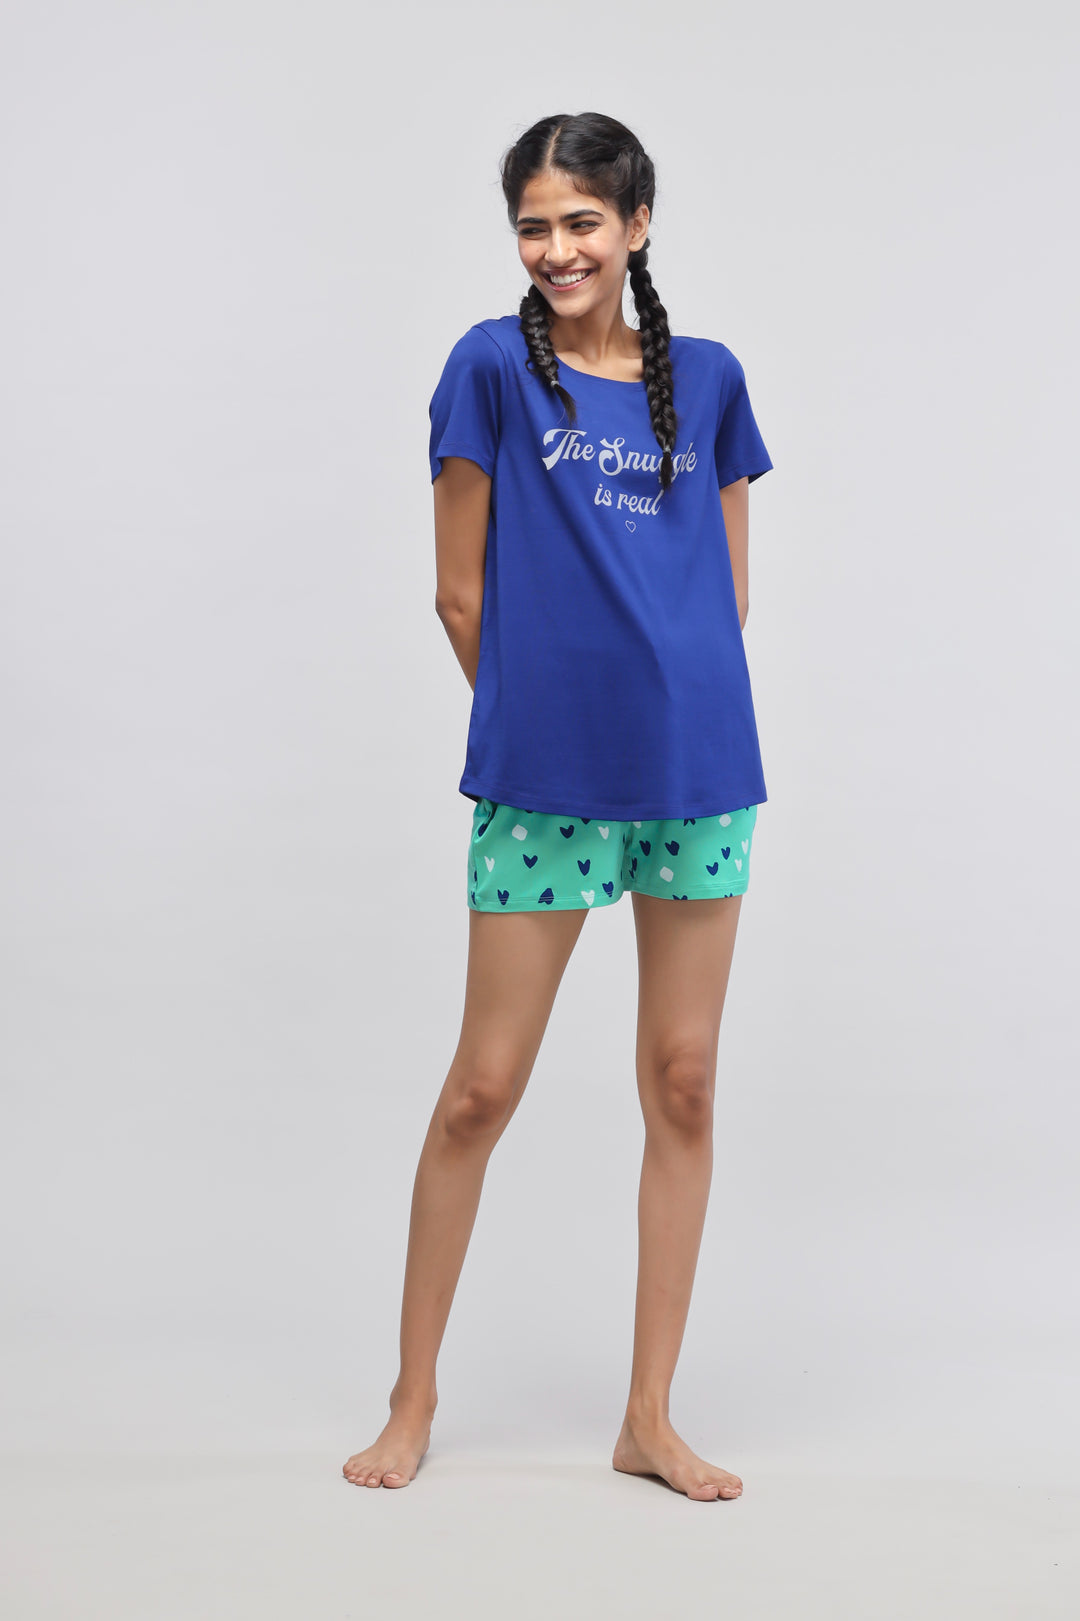 Snuggle is real Blue Shorts Set